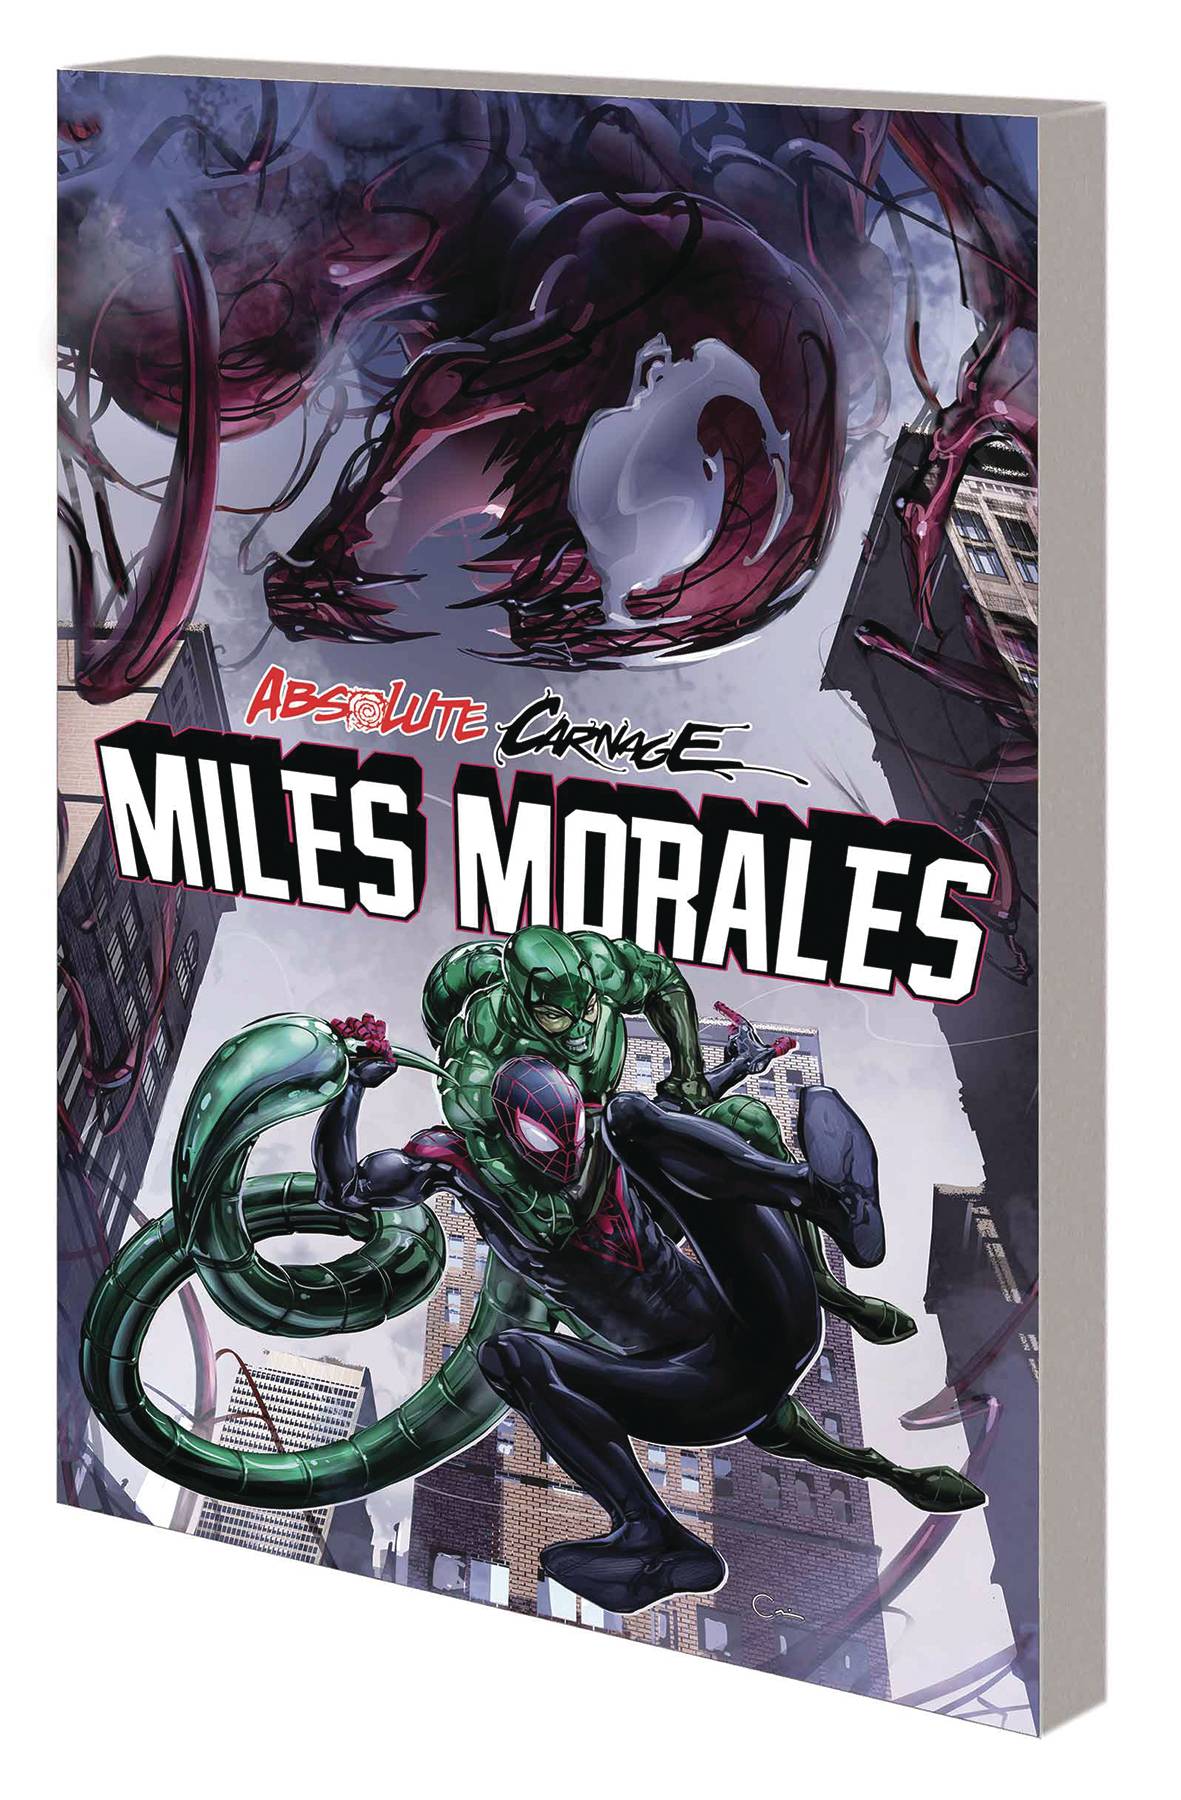 Absolute Carnage Miles Morales #1 preorder 08/28/2019 STOCK PHOTO Marvel 2019